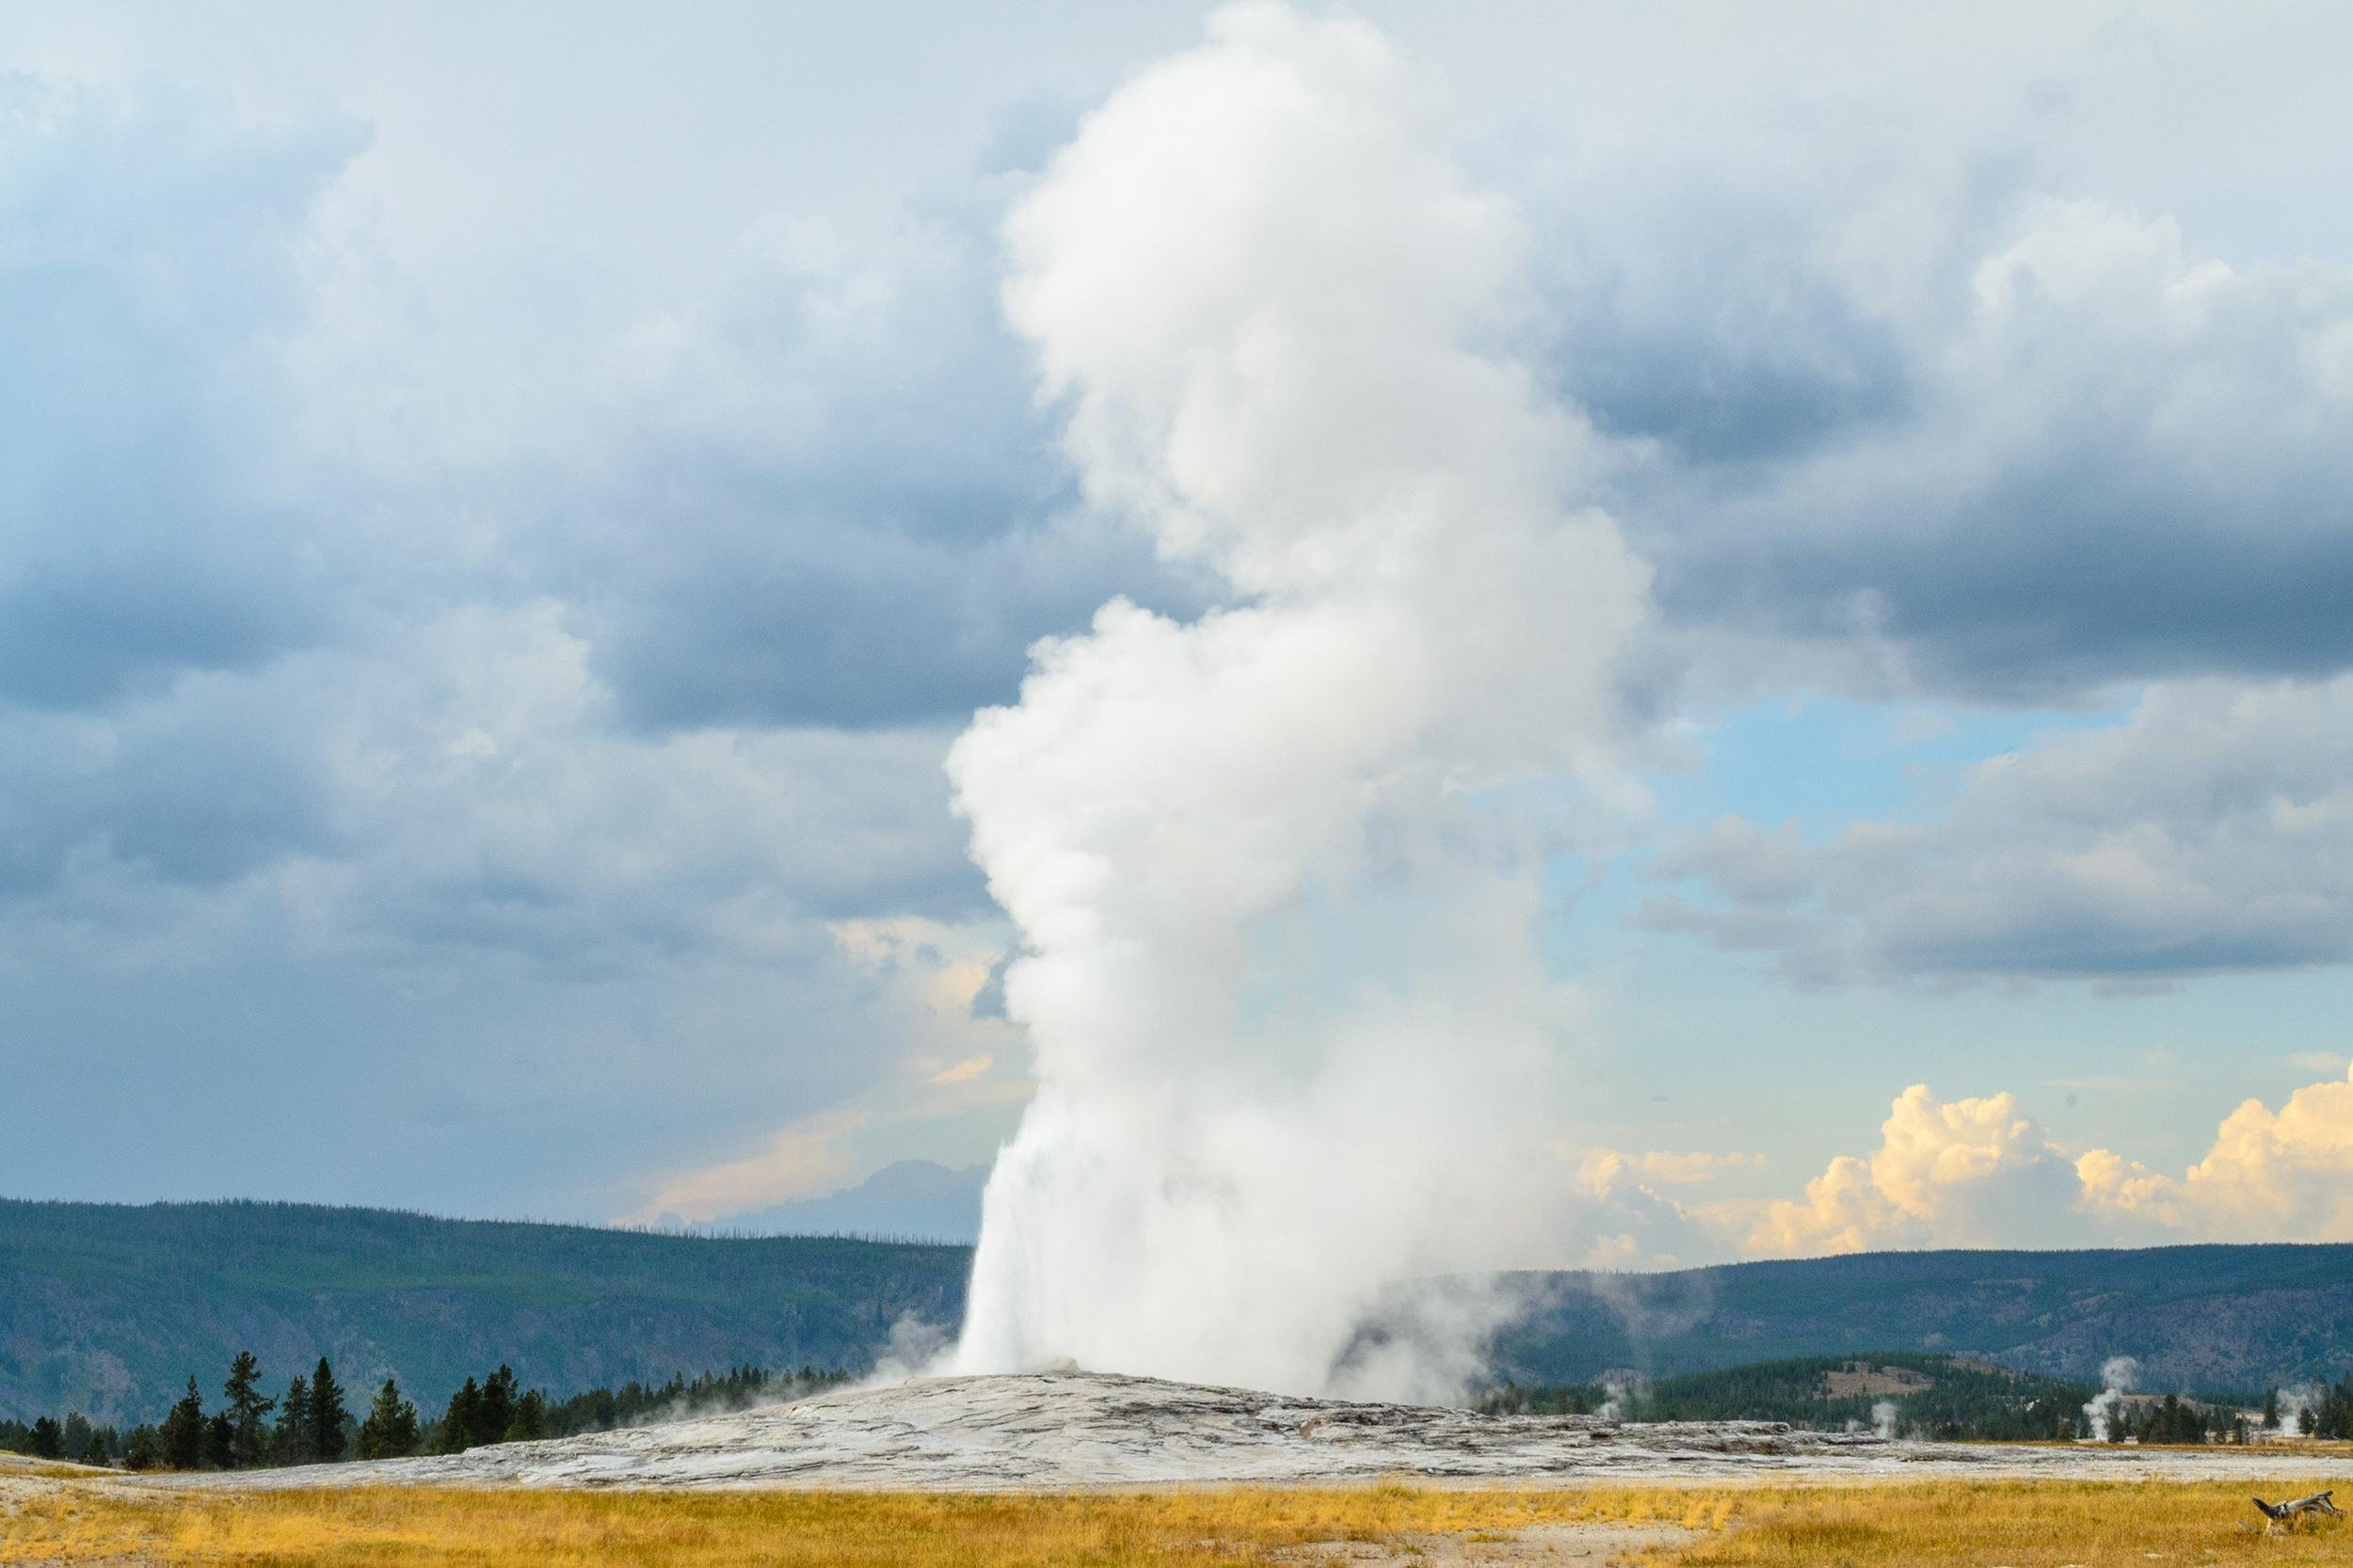 <p>Yellowstone National Park is hyped as a camping, hiking, and recreational attraction for a reason: It's an absolutely stunning part of the country. A photo in front of Old Faithful is nothing to shake a selfie stick at. The famous geyser erupts every one to two hours, and a National Park Service <a href="https://www.nps.gov/yell/planyourvisit/app.htm">geysers app</a> estimates when visitors should be ready to pose … while some park pros have advice on <a href="https://www.yellowstonepark.com/photos/bad-selfies">where <i>not</i> to take a selfie</a> in Yellowstone.</p><div class="rich-text"><p>This article was originally published on <a href="https://blog.cheapism.com/good-places-to-take-pictures-4279/">Cheapism</a></p></div>